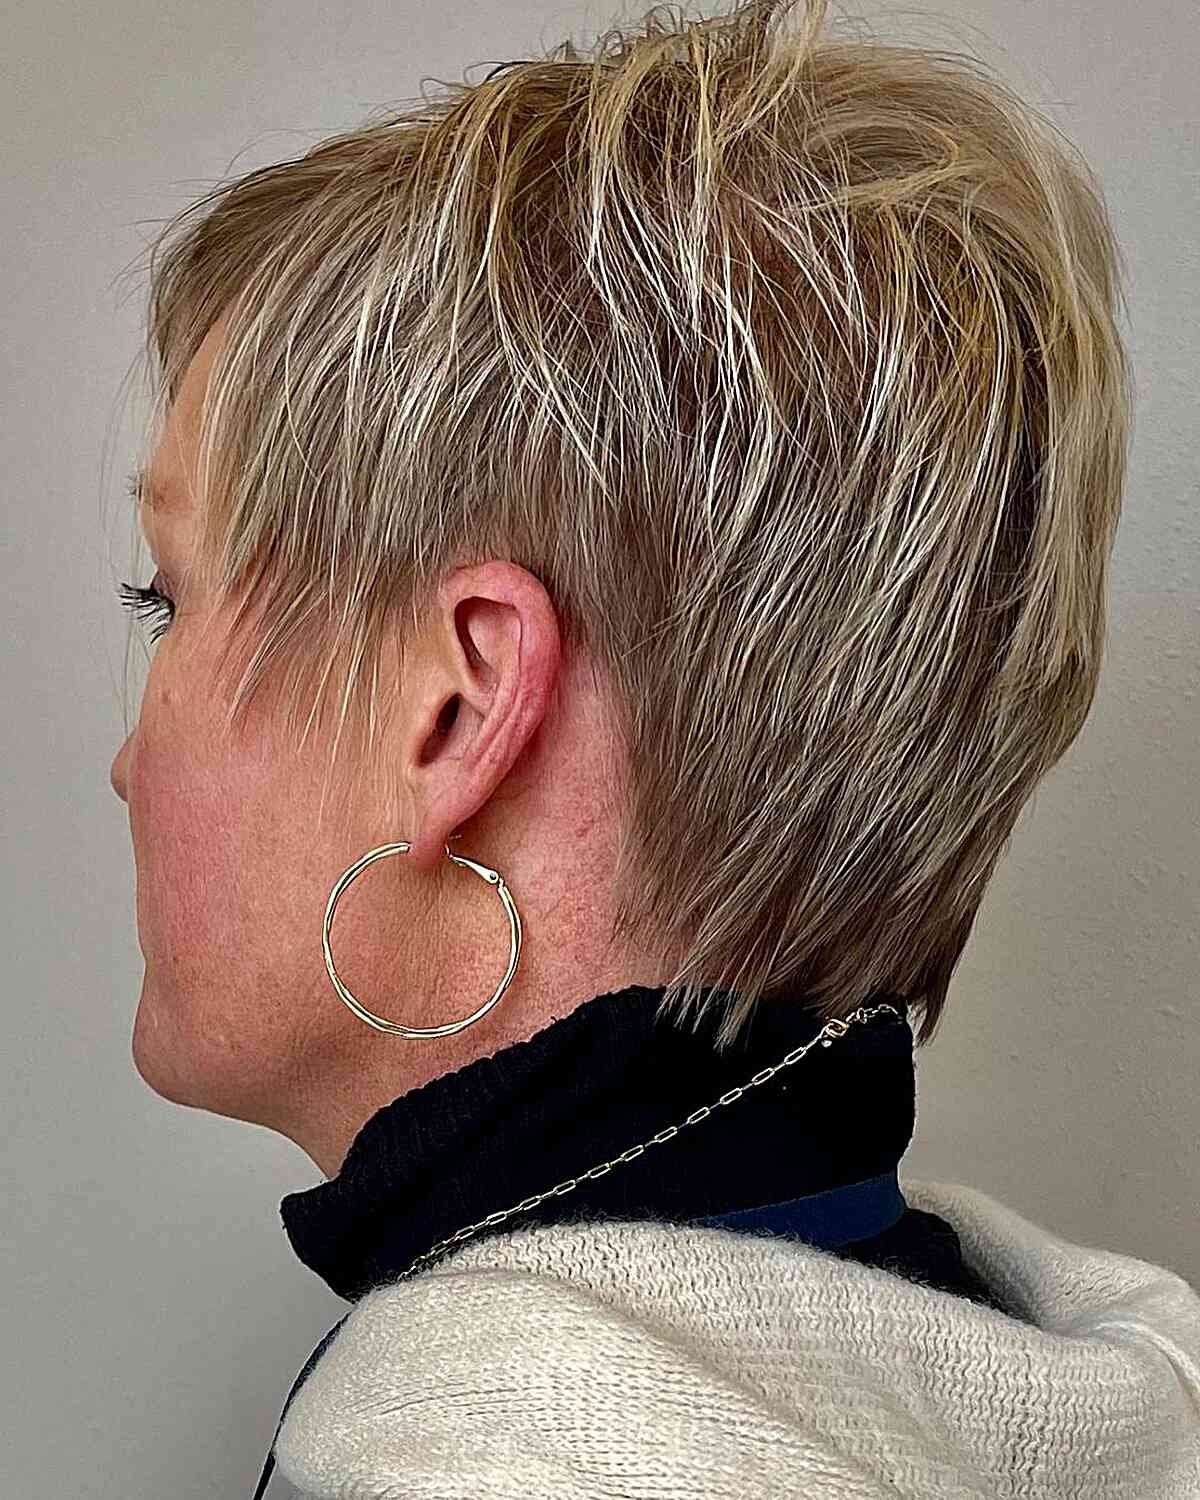 Short Golden Blonde Balayage Pixie Hair with Choppy Layers for Women Over 50 with Thin Locks